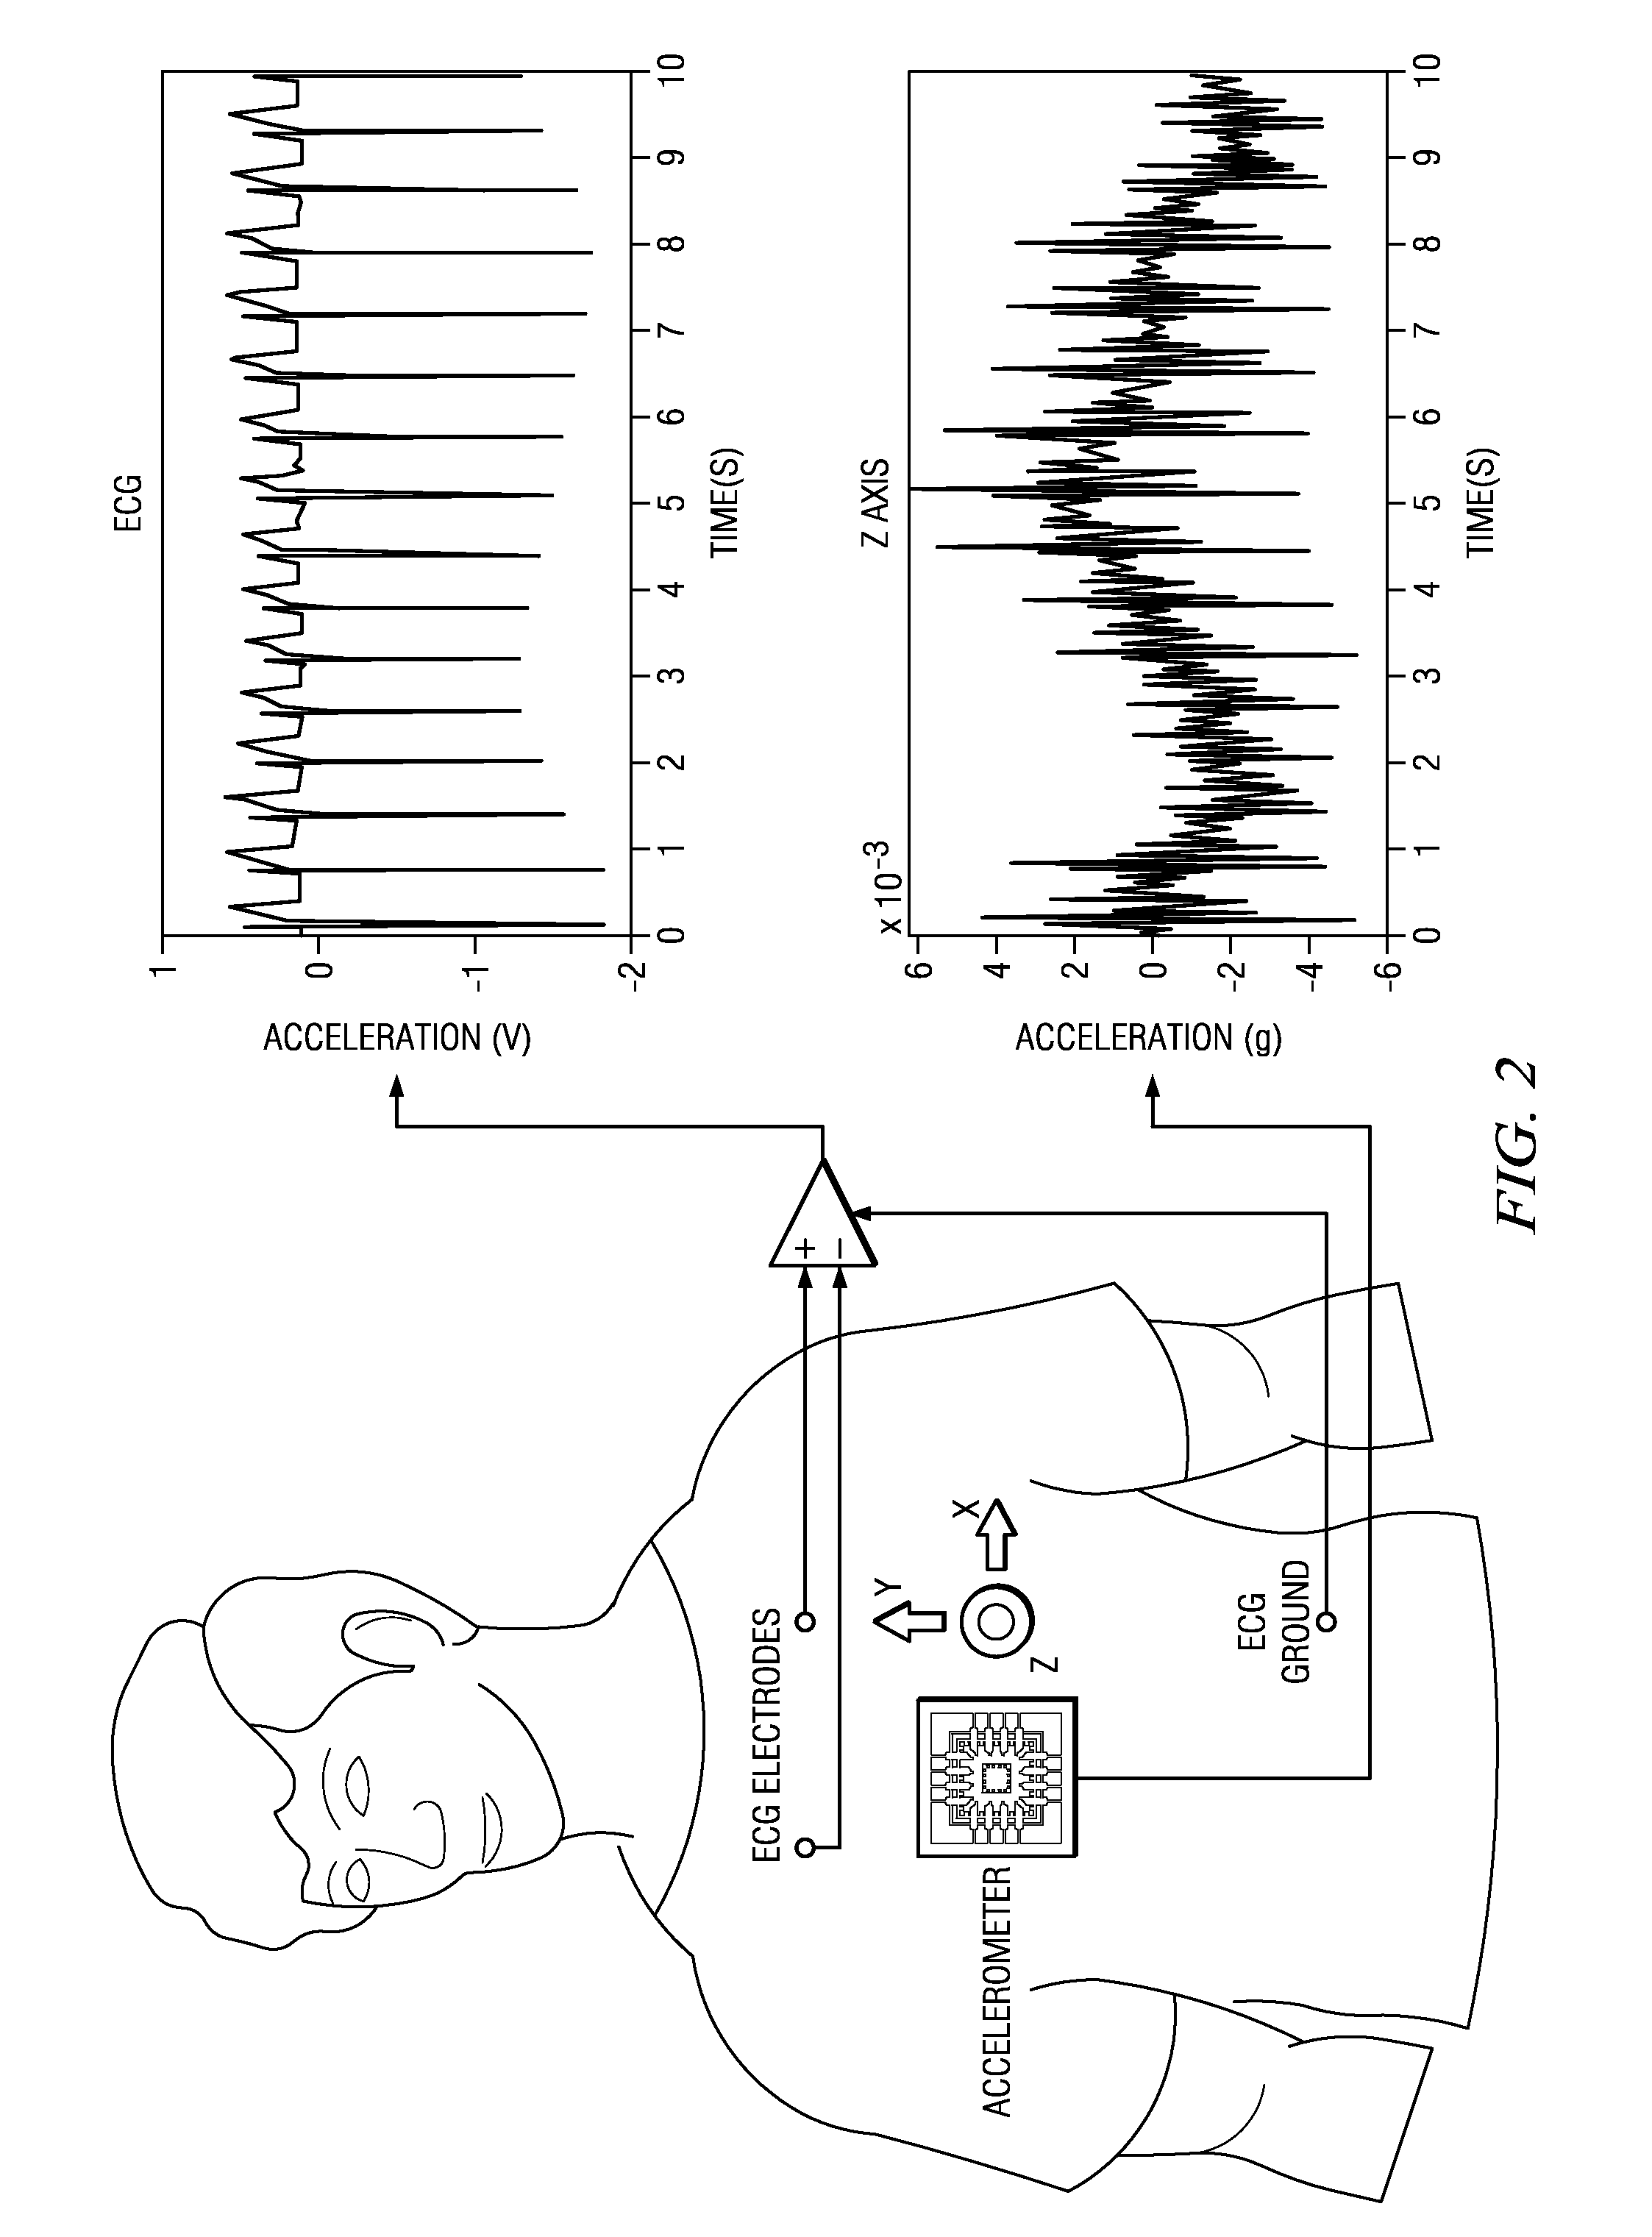 Heart monitors and processes with accelerometer motion artifact cancellation, and other electronic systems